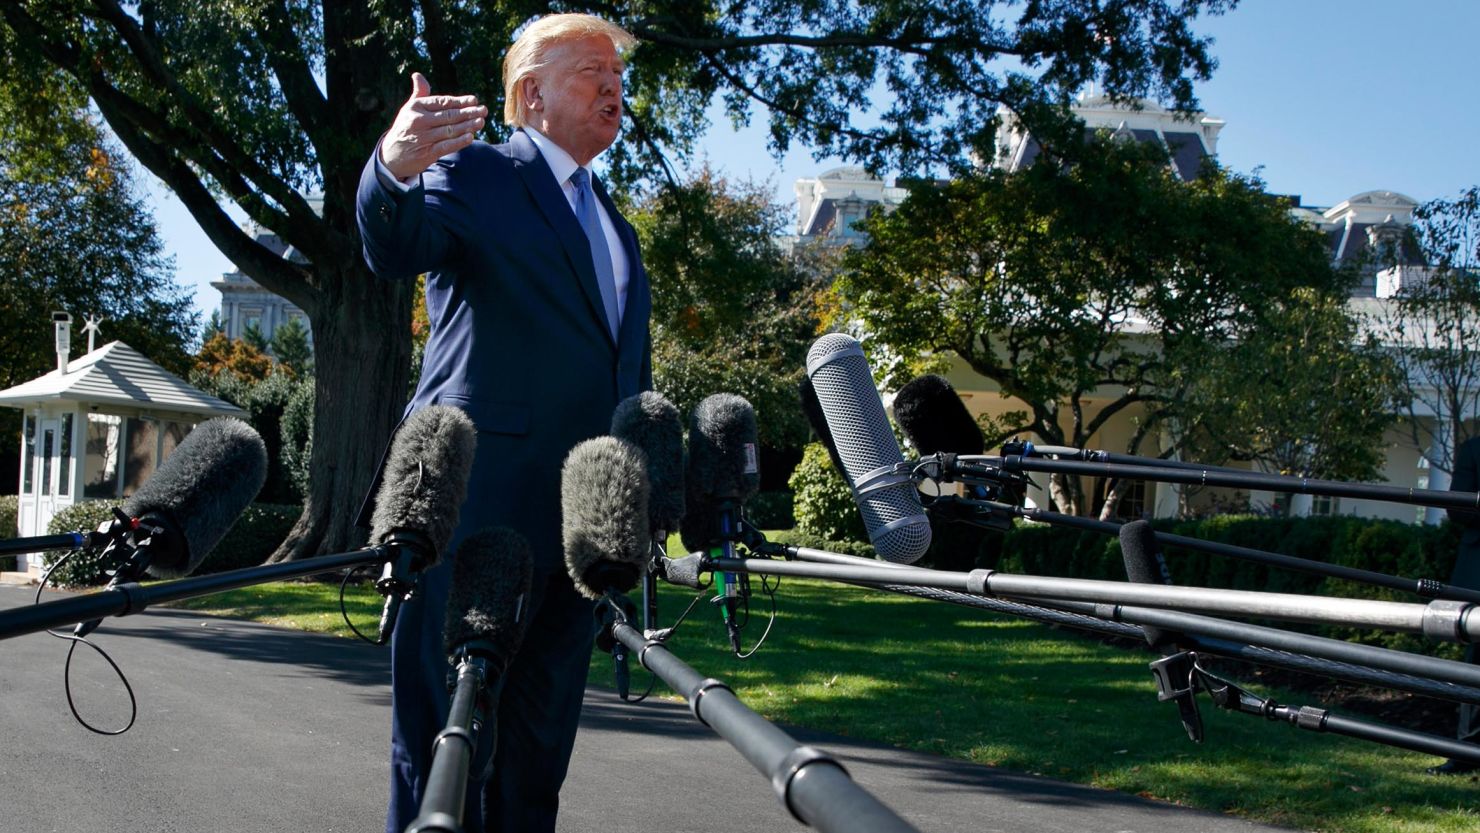 President Donald Trump speaks to members of the media as he leaves the White House, Wednesday, October 23.